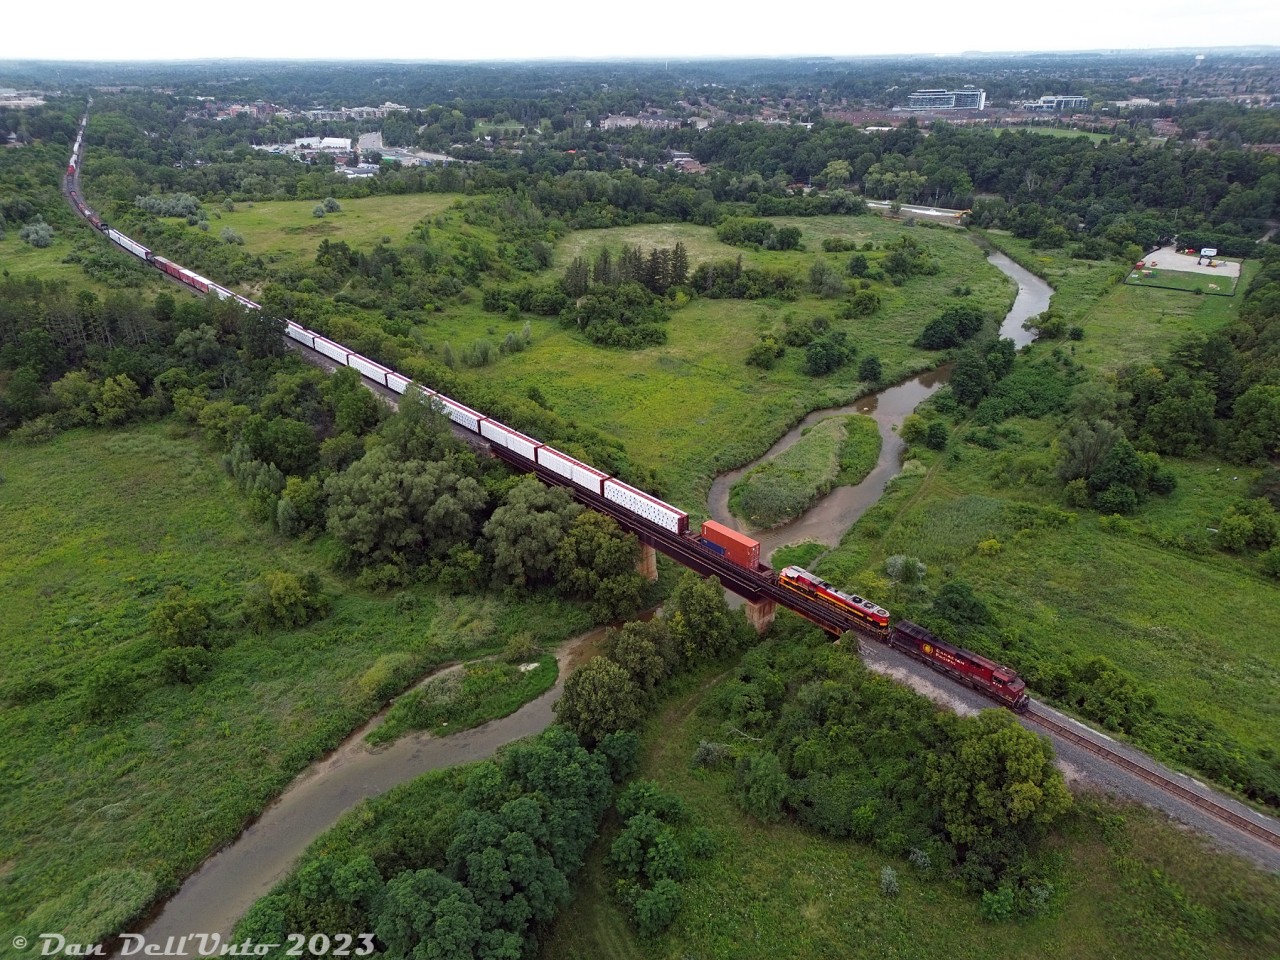 CPKC train #420 makes its way south down the MacTier Sub, crossing the mighty Humber River south of Woodbridge on the approach to Emery. Today's power is CP AC4400CW 9713 and KCSM SD70ACe 4163.

CP's Humber River bridge at Mile 10.48 MacTier Sub was constructed as part of one of the old line realignments around Woodbridge: the original Toronto, Grey & Bruce line snaked through the lower part of the valley here and crossed the river at a lower bridge*, until straightening and elevating the line for the present high-level bridge shown. The original TG&B line at the upper left also kept going straight off to the left (to out of frame) at the present curve, once entering Woodbridge on a more westerly alignment. This was realigned east to the present alignment (north of the curve, heading into the distance) around 1907-1908, and the north end of the old alignment became a short spur into town.

And if that wasn't enough, the old Toronto Suburban Railway interurban line from Weston to Woodbridge snaked along the Humber River through the valley here until its discontinuance in 1926. (A look at some old aerial imagery from 1961 shows a few of the old alignments from both.

* That small white square, visible poking up in the Humber River north of the "island" on the east side, may be an old bridge abutment from the original alignment.